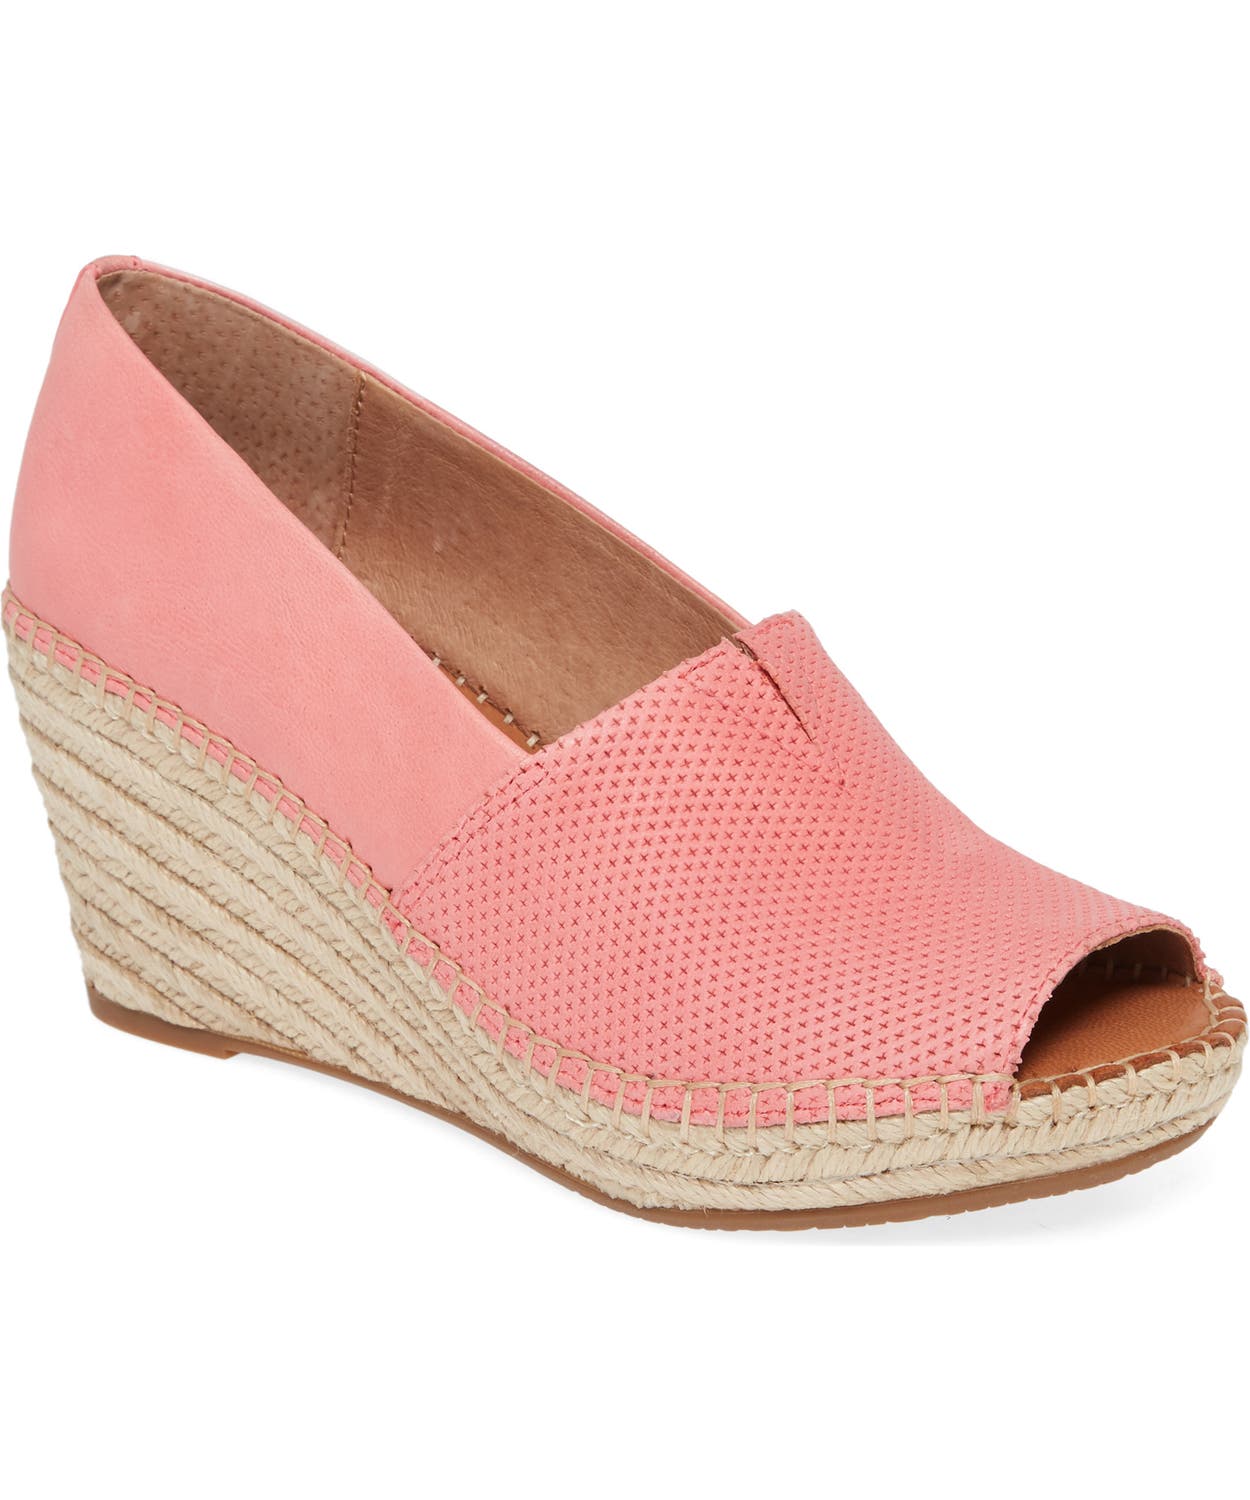 woocommerce-673321-2209615.cloudwaysapps.com-gentle-souls-by-kenneth-cole-womens-pink-leather-charli-espadrille-wedges